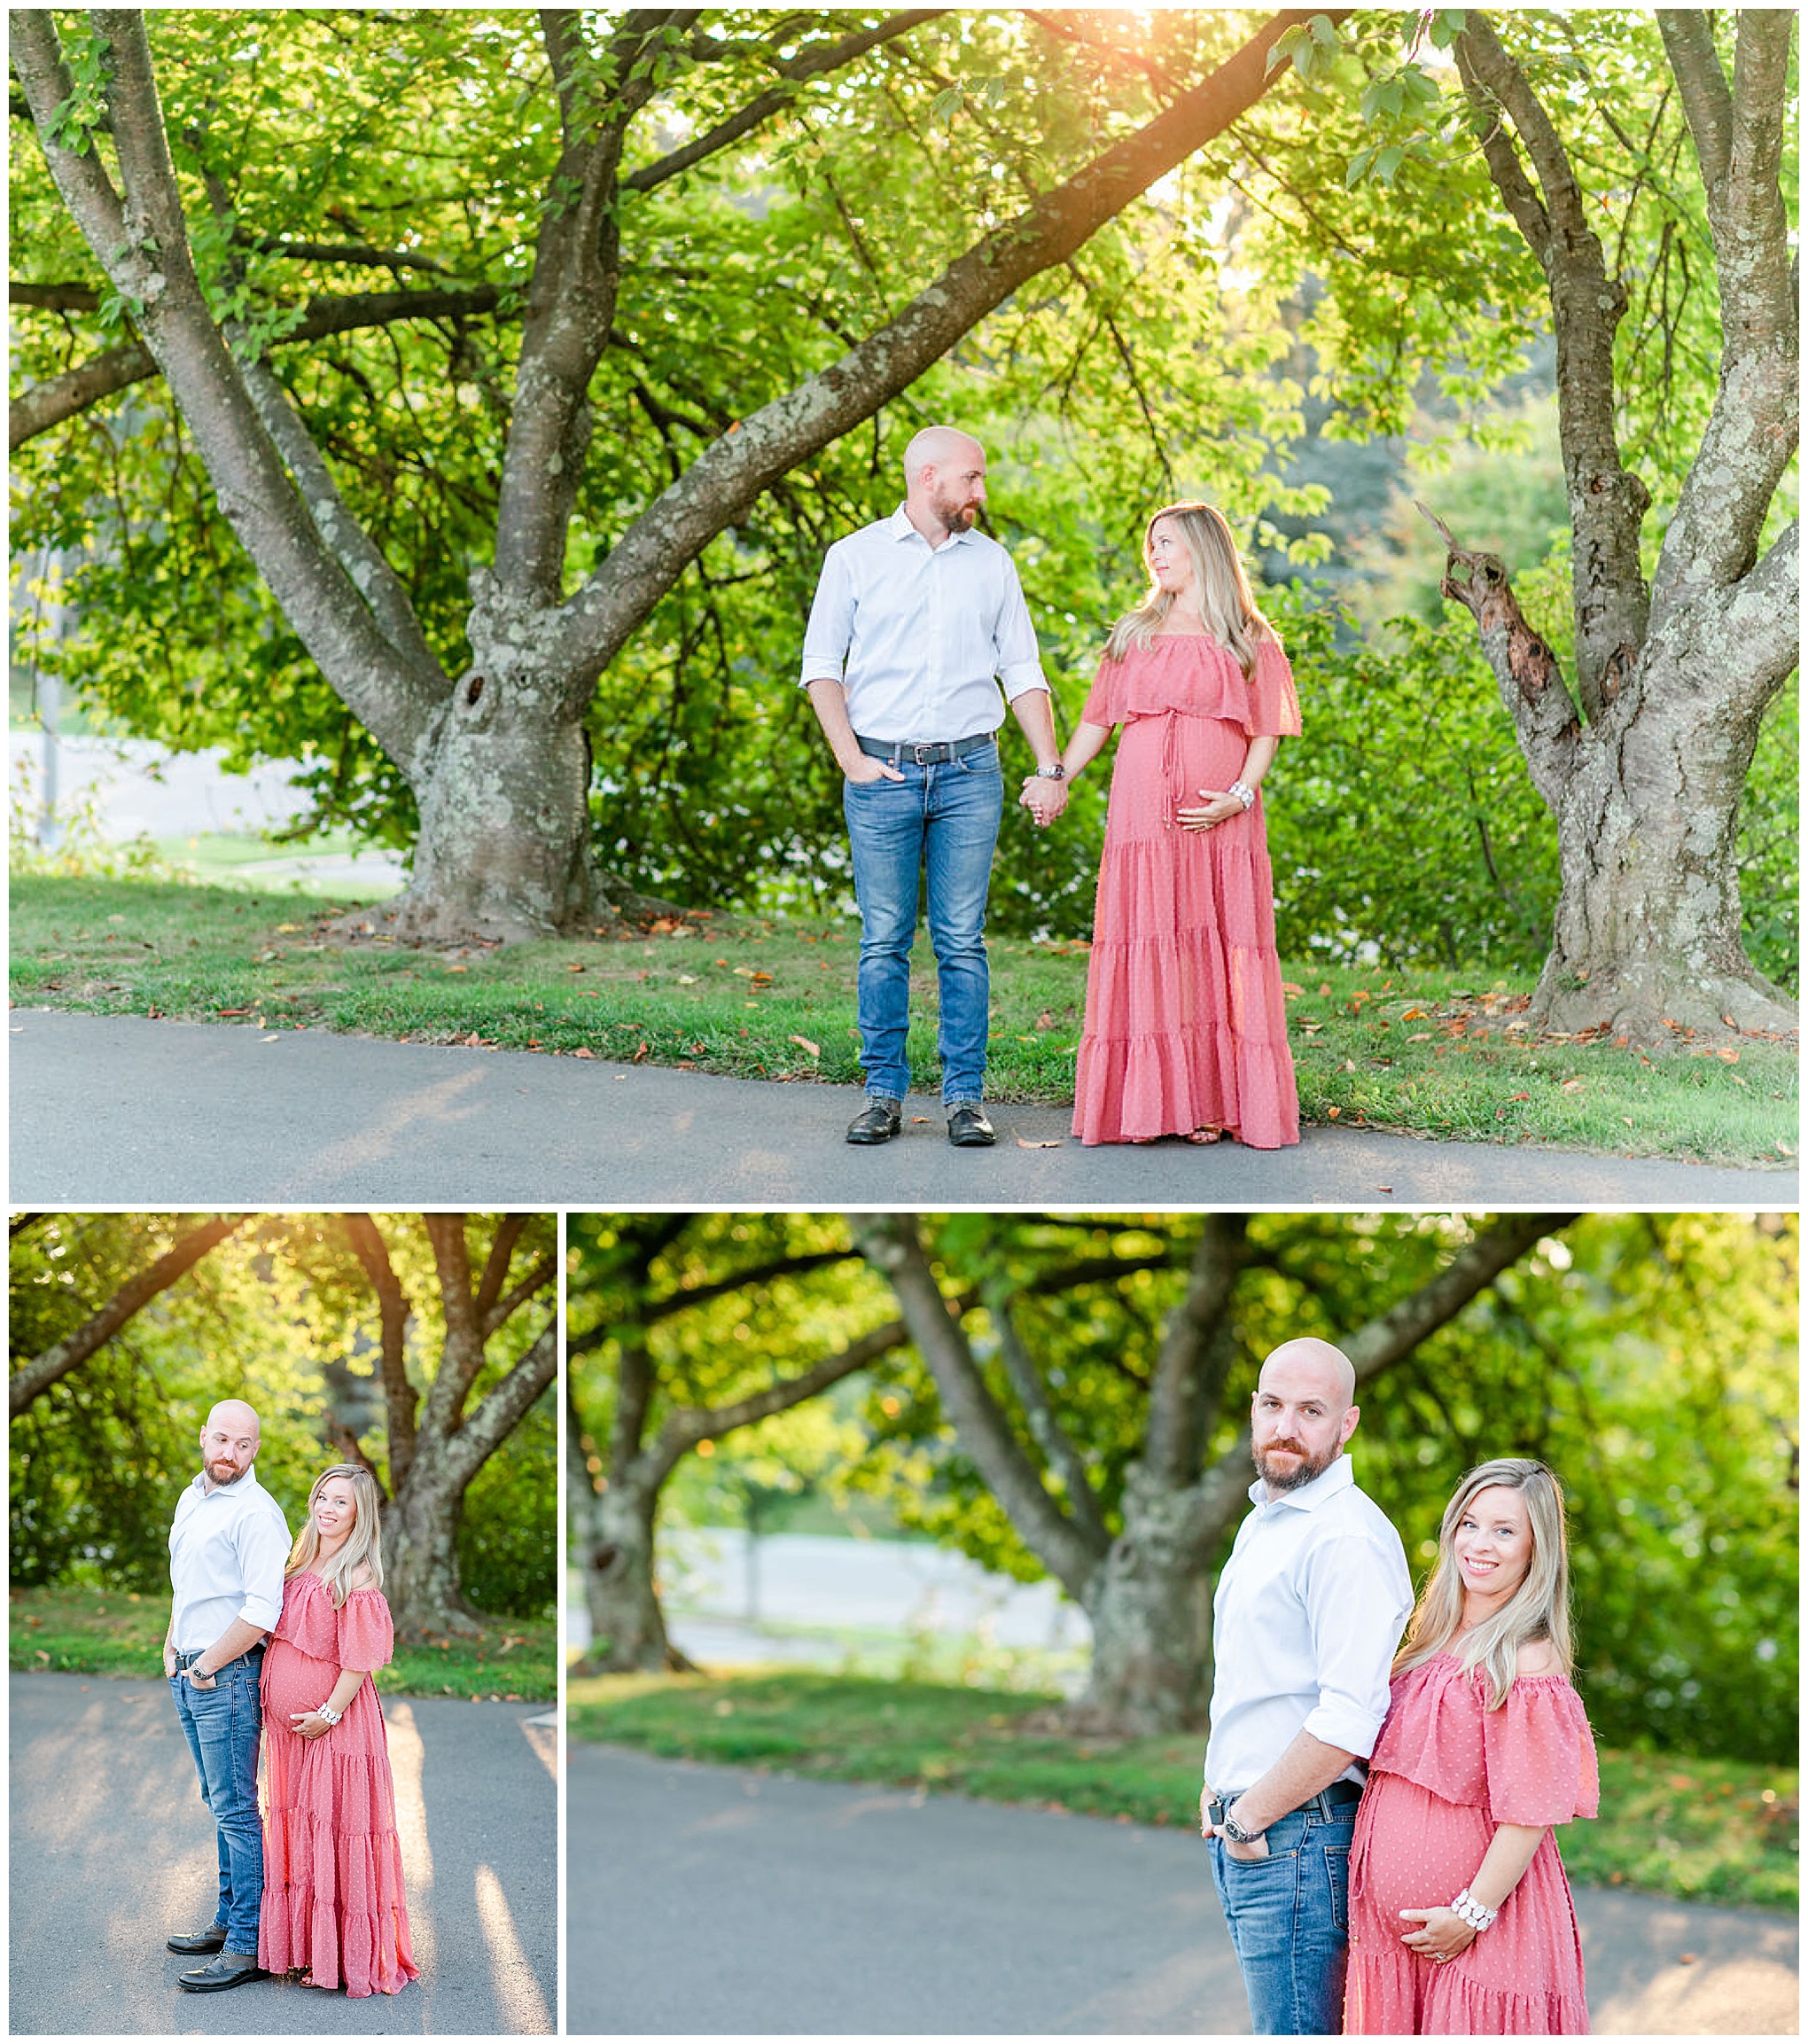 Glenview Mansion maternity session, Glenview Mansion photographer, Glenview Mansion photos, natural light maternity photos, maternity photos outfit ideas, DC photo shoot locations, DC wedding venue, Maryland wedding venue, autumn maternity photos, Rachel E.H. Photography, couple holding hands in front of trees, couple holding hands on nature trail